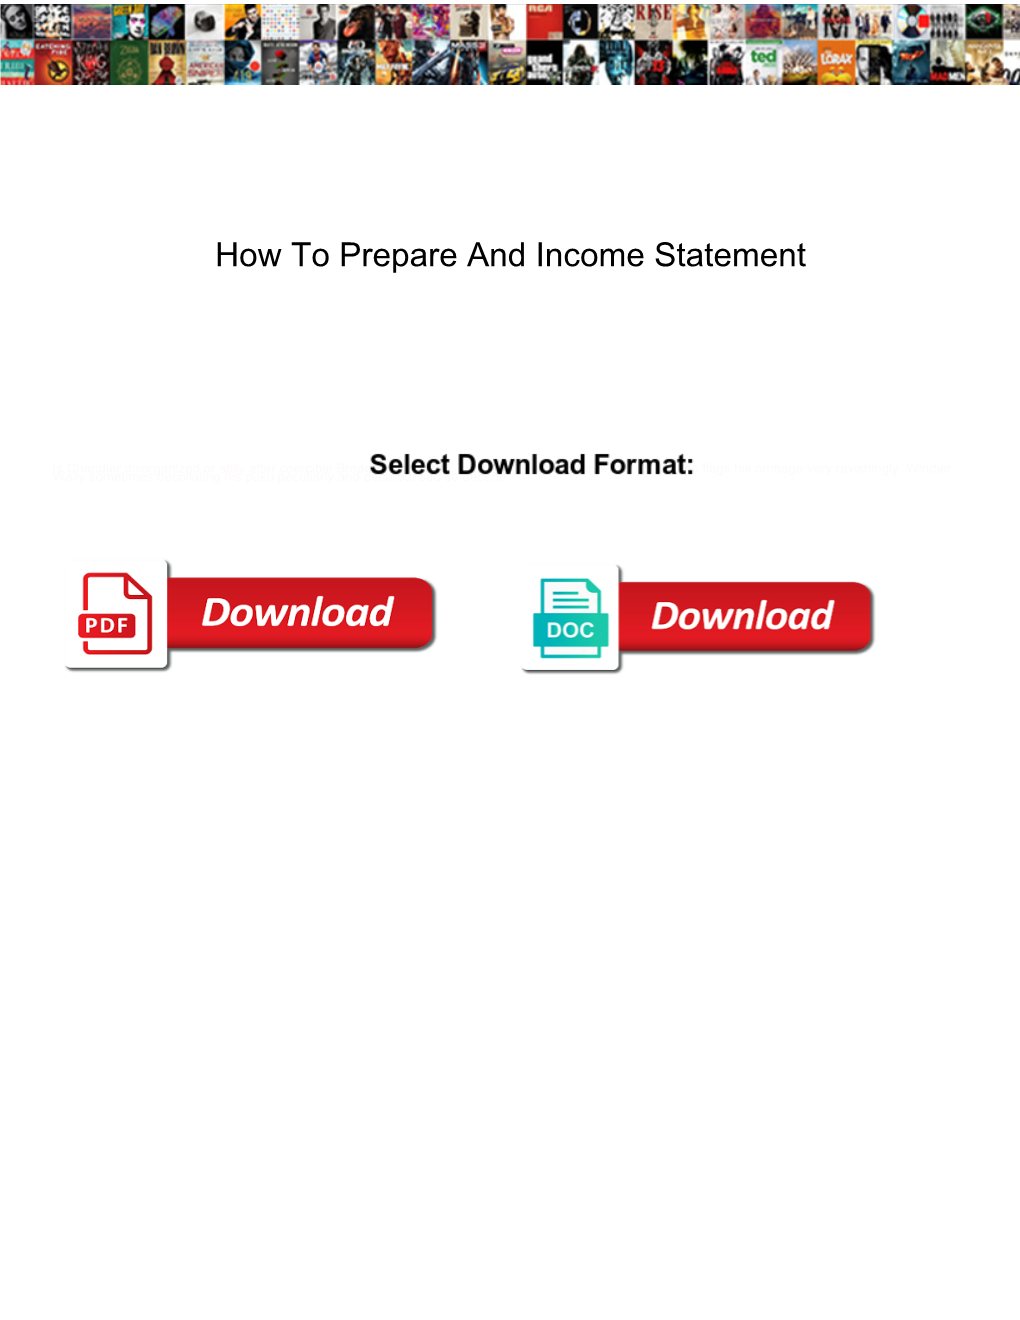 How to Prepare and Income Statement